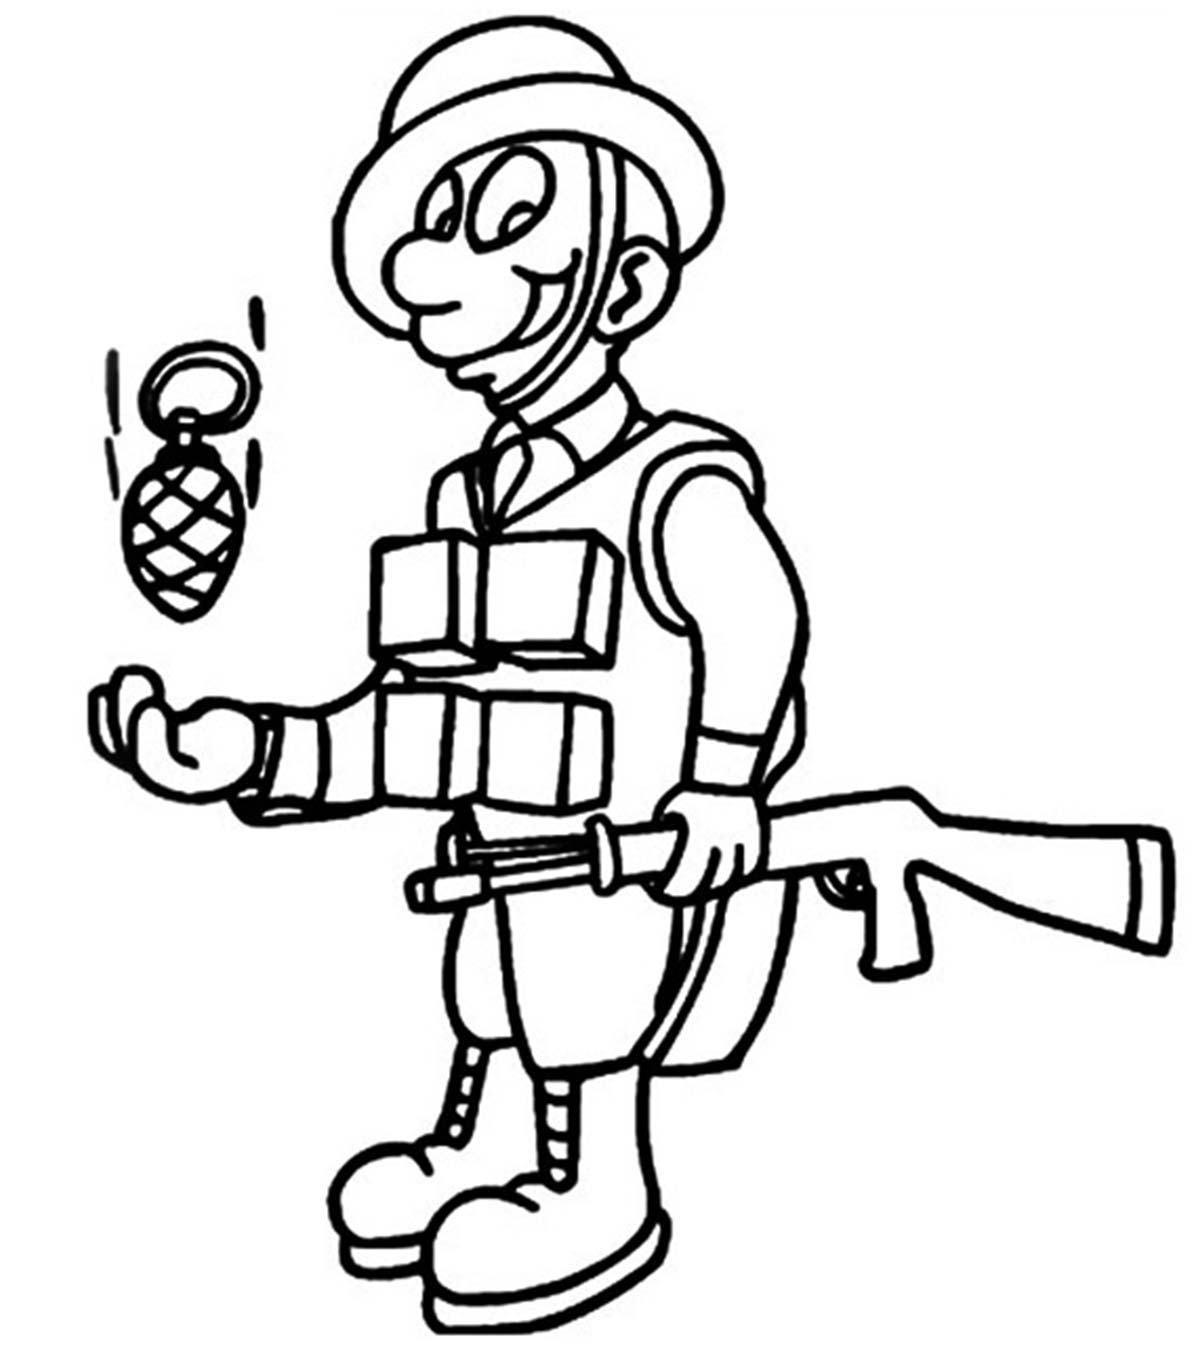 Top 10 Soldier Coloring Pages For Your Toddler_image